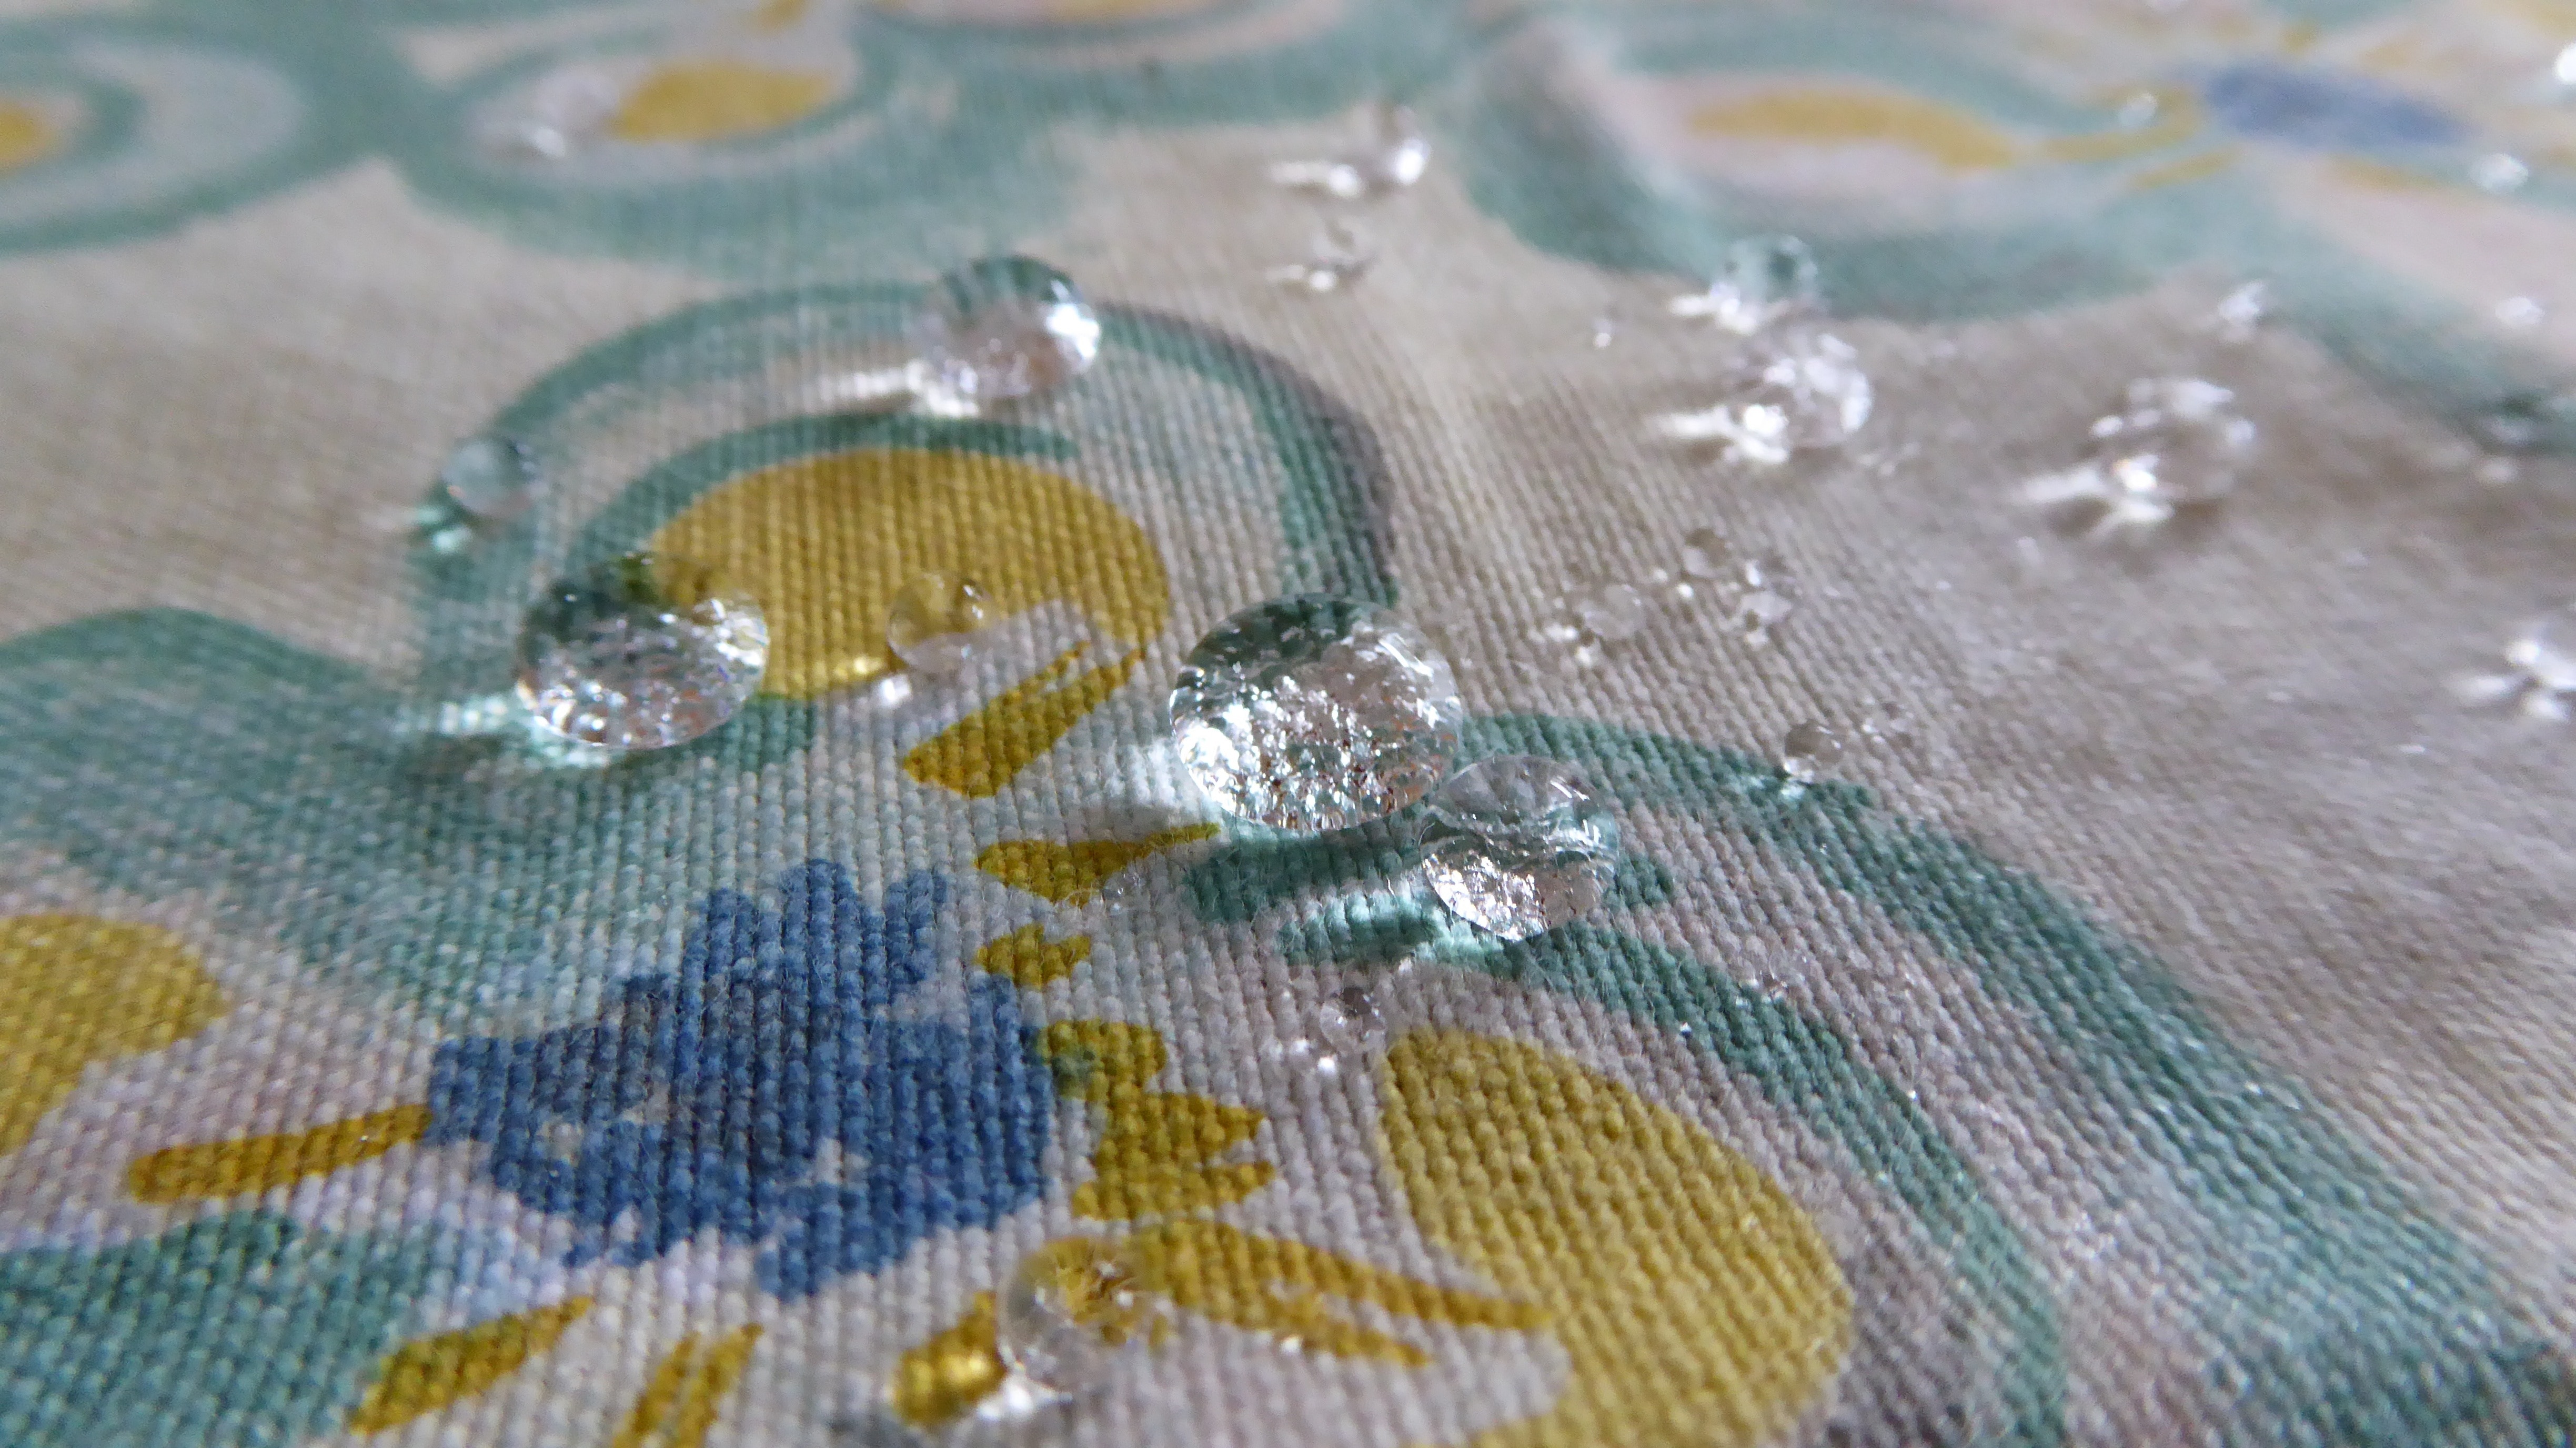 water drop on yellow and blue floral textile